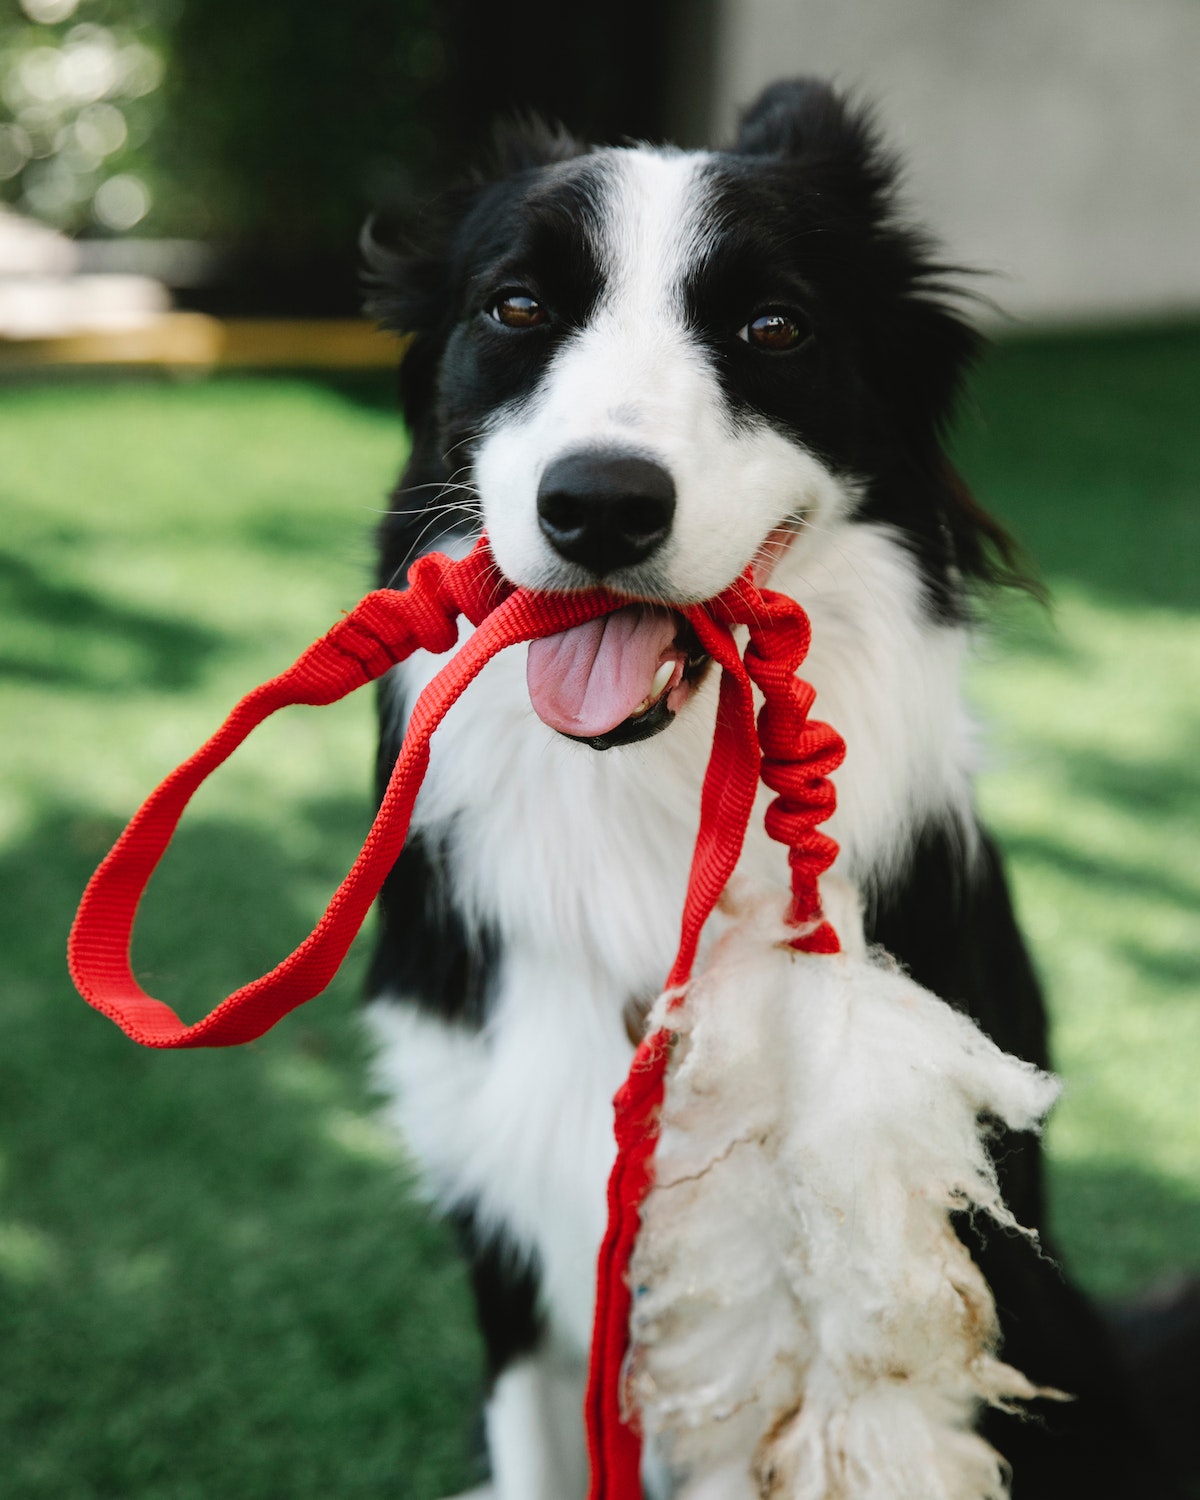 Dog holding red leash in its mouth.